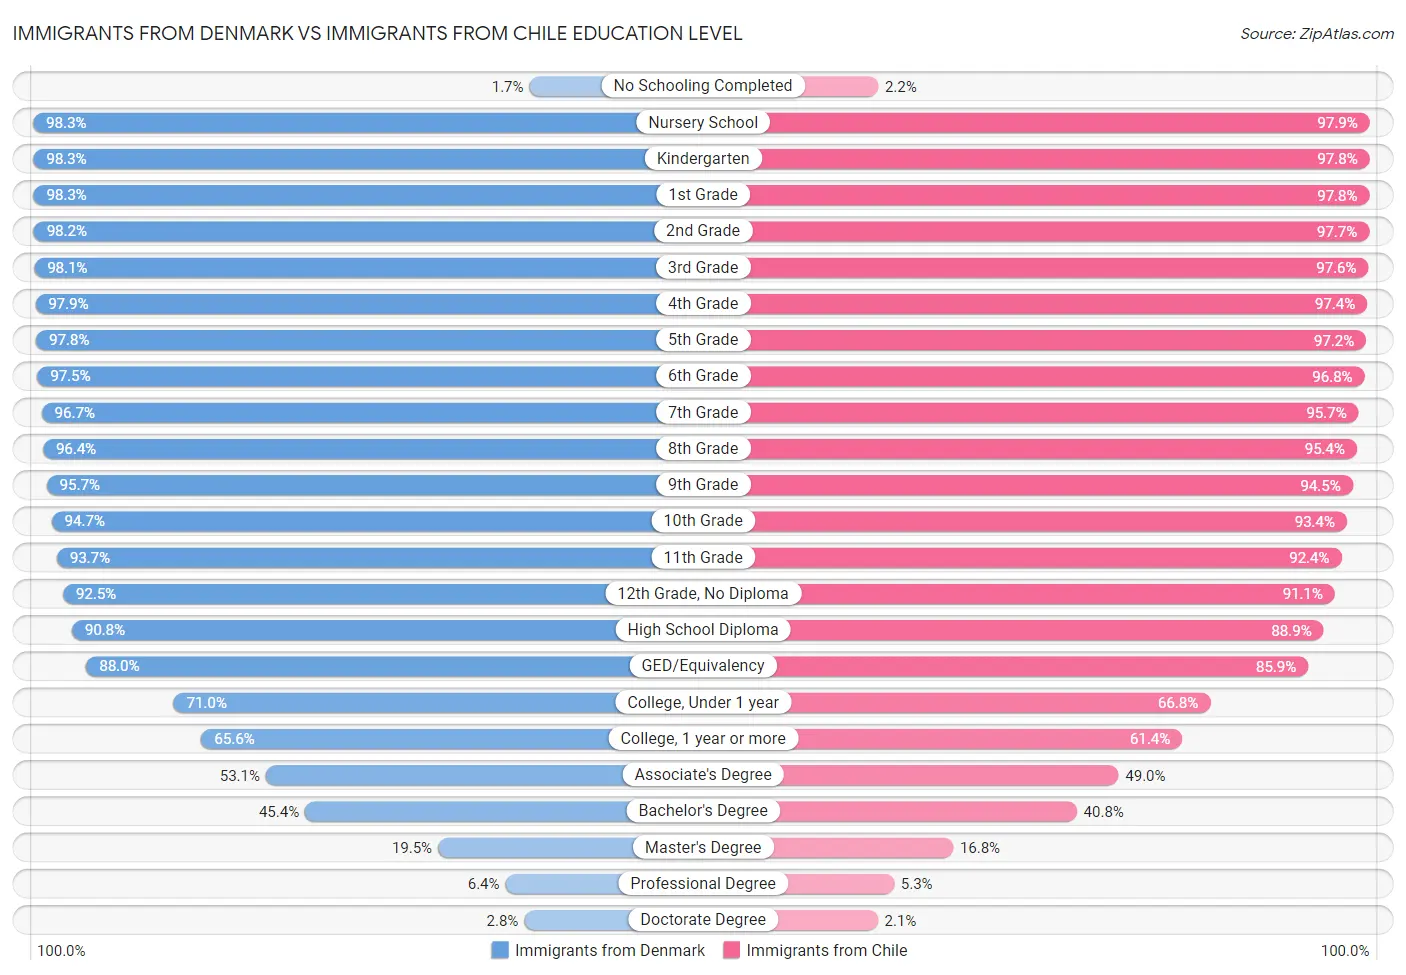 Immigrants from Denmark vs Immigrants from Chile Education Level